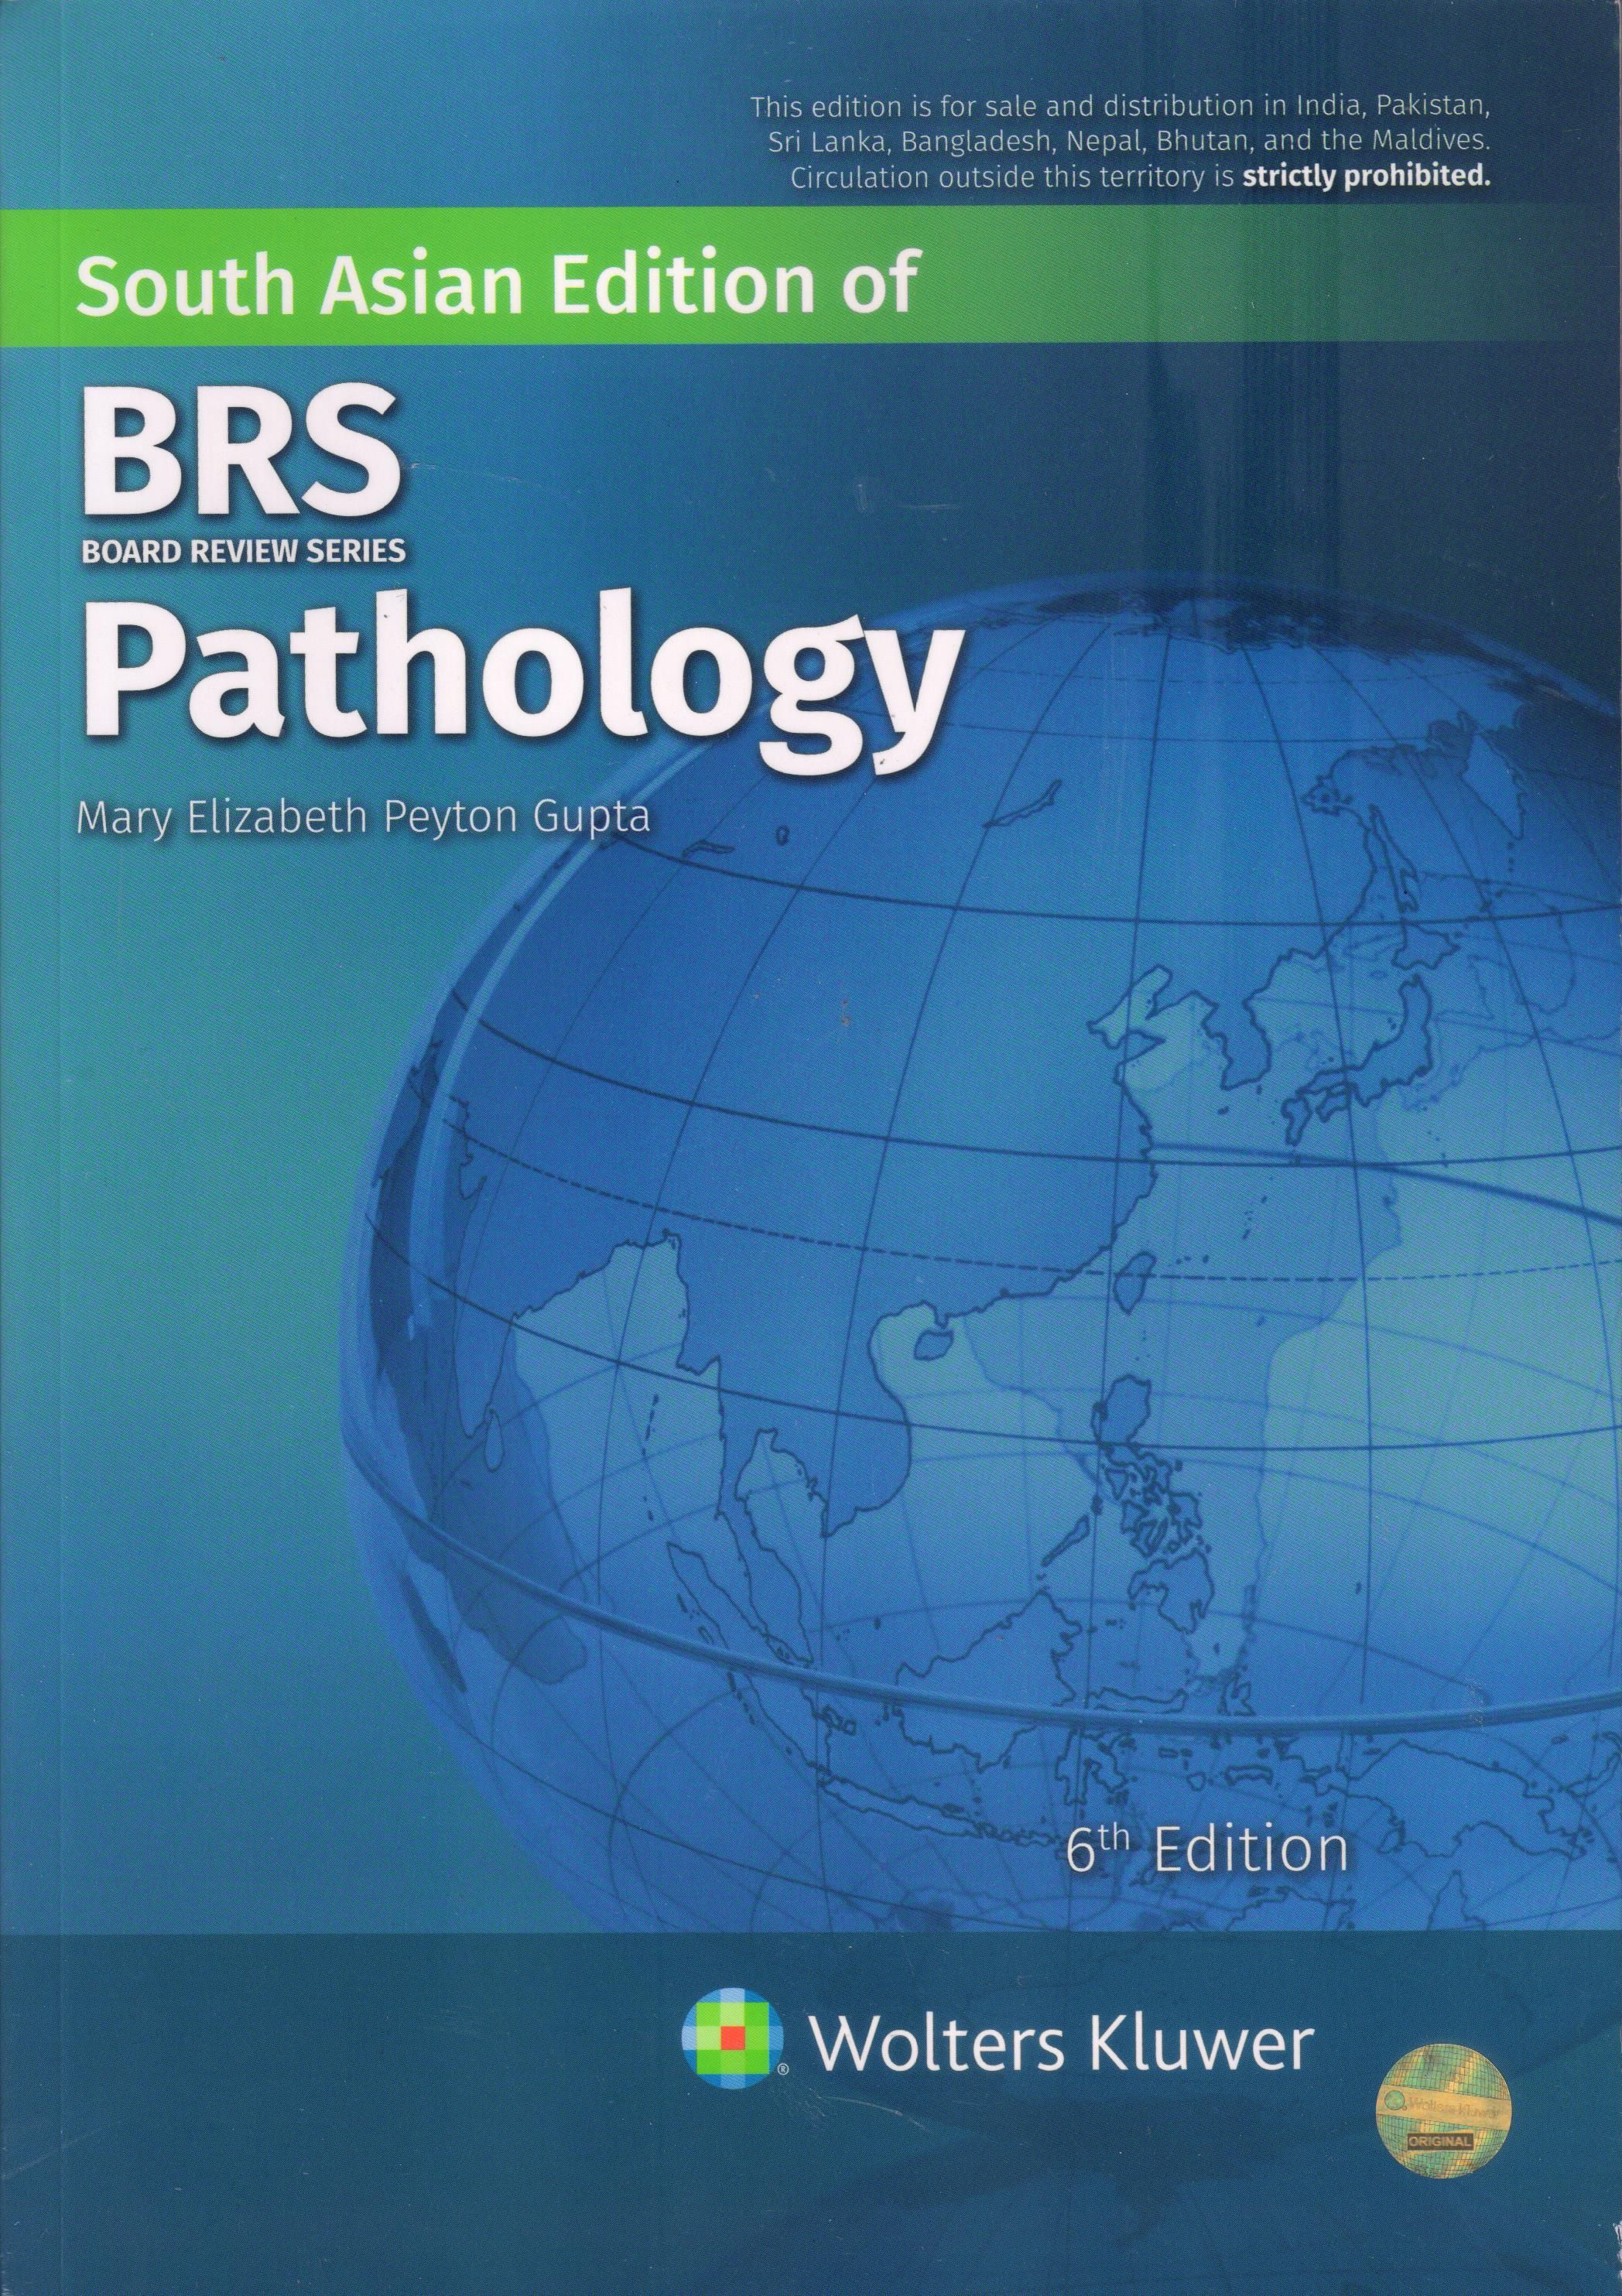 

mbbs/3-year/brs-board-review-series-pathology-6-ed--9789389859317